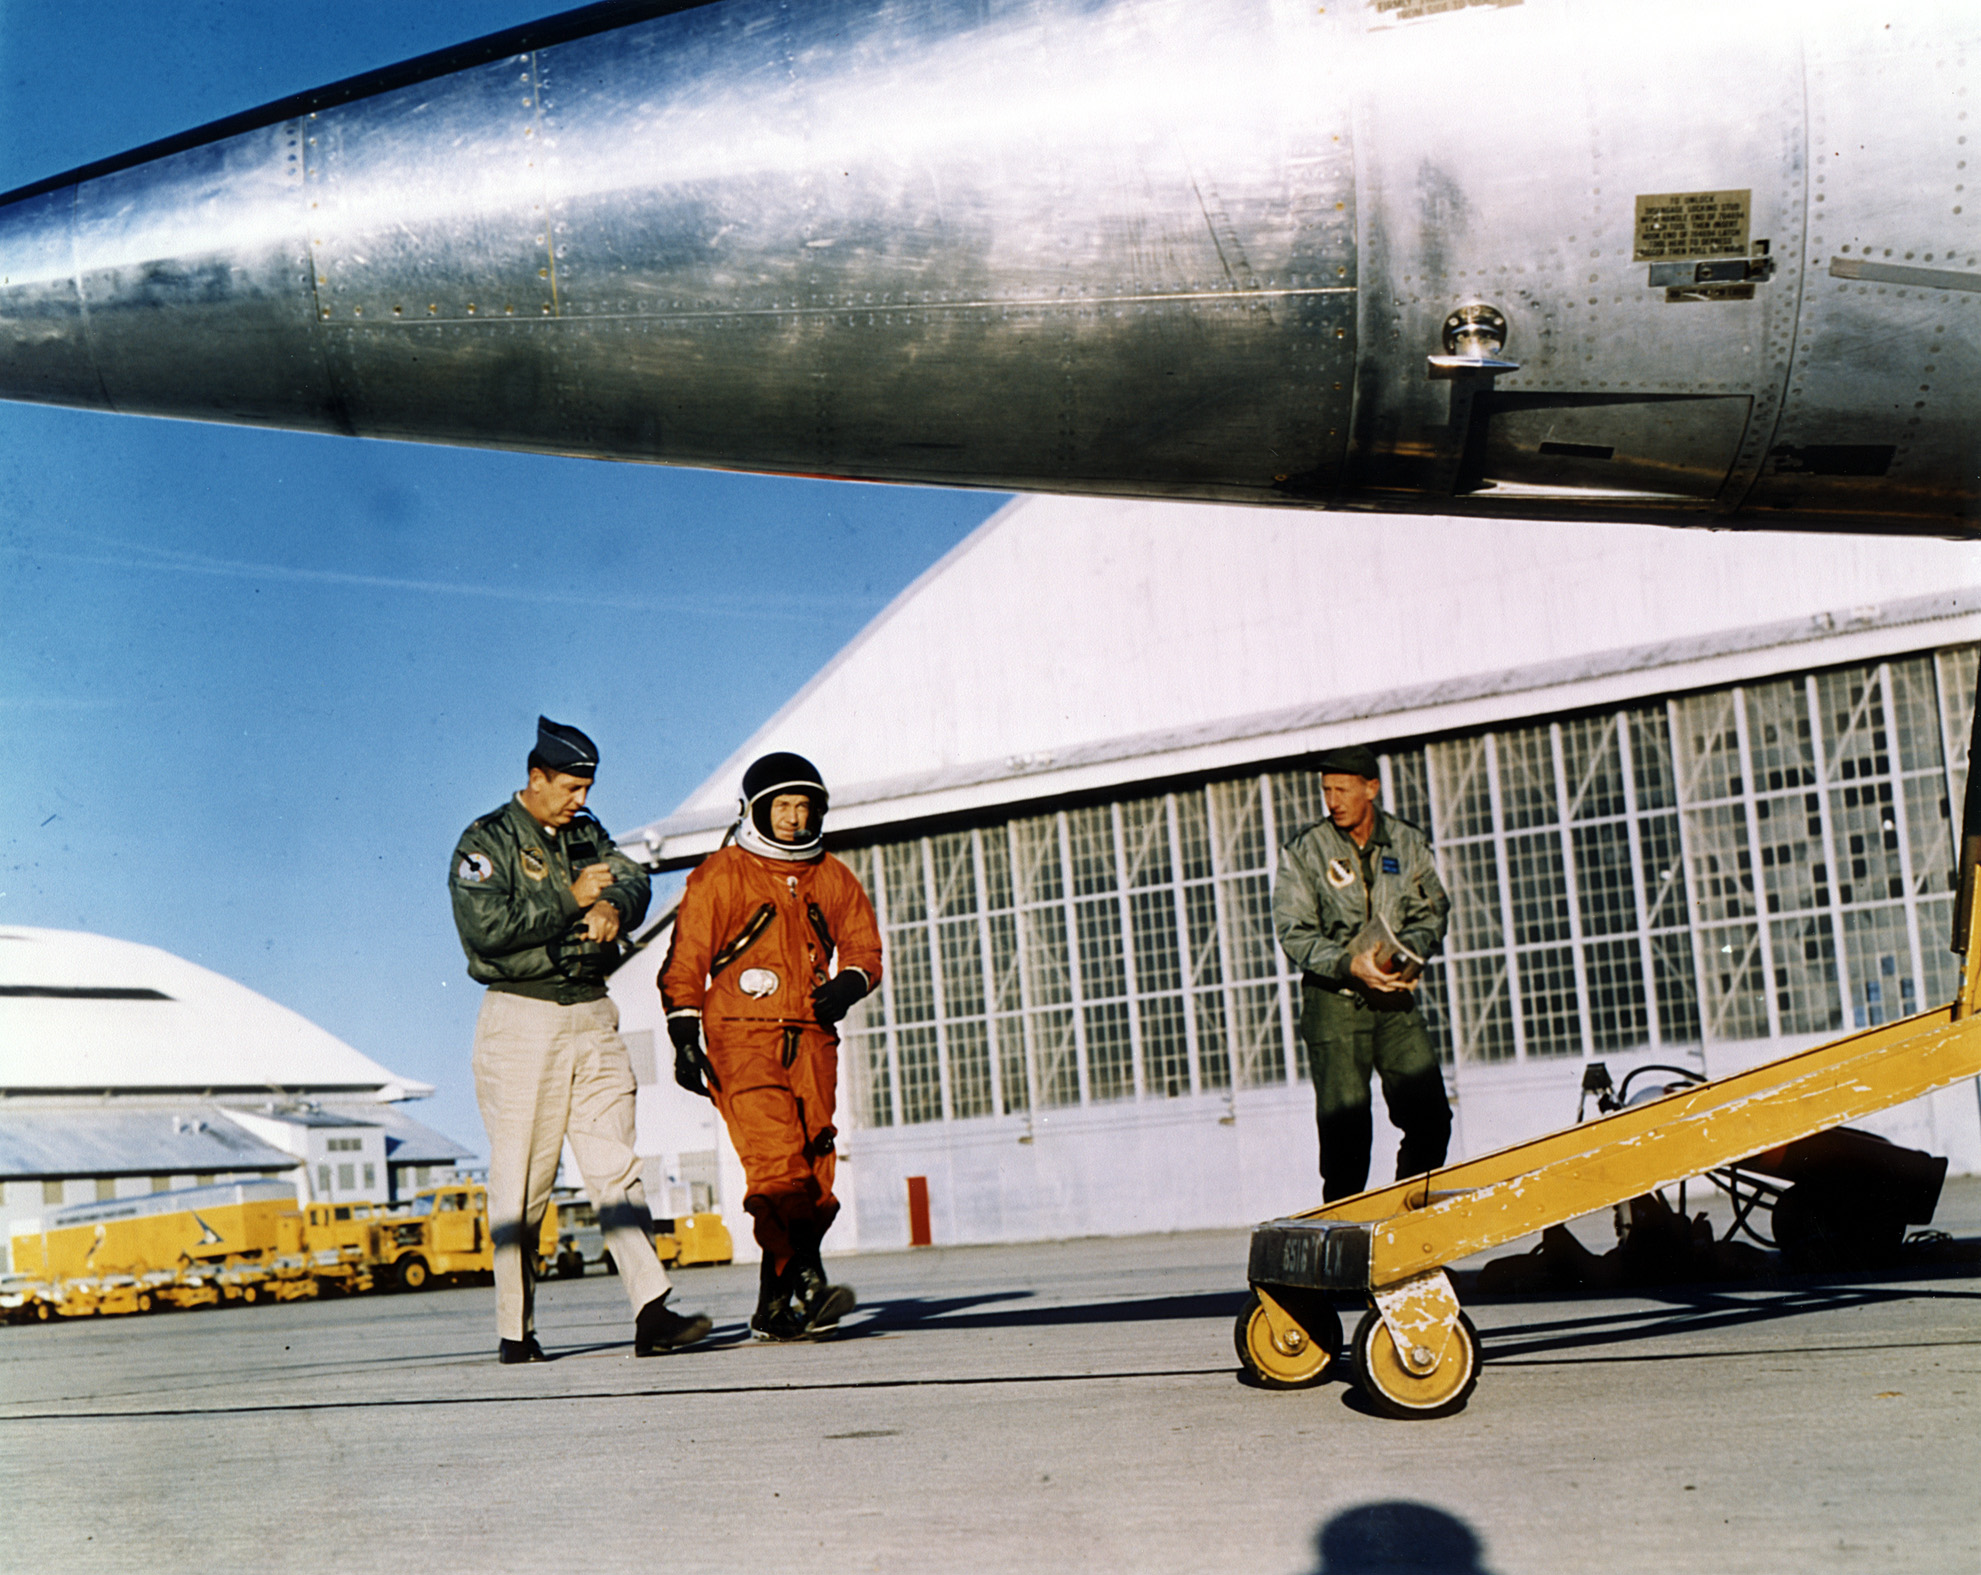 Colonel Charles E. Yeager, U.S. Air Force, wearing a David Clark Co. A/P22S-2 full-pressure suit, accompanied by Major Ralph N. Richardson of the Aviation Physiology Laboratory, Richardson, walks to a Lockheed NF-104A Aerospace Trainer at Edwards Air Force base. (U.S. Air Force)